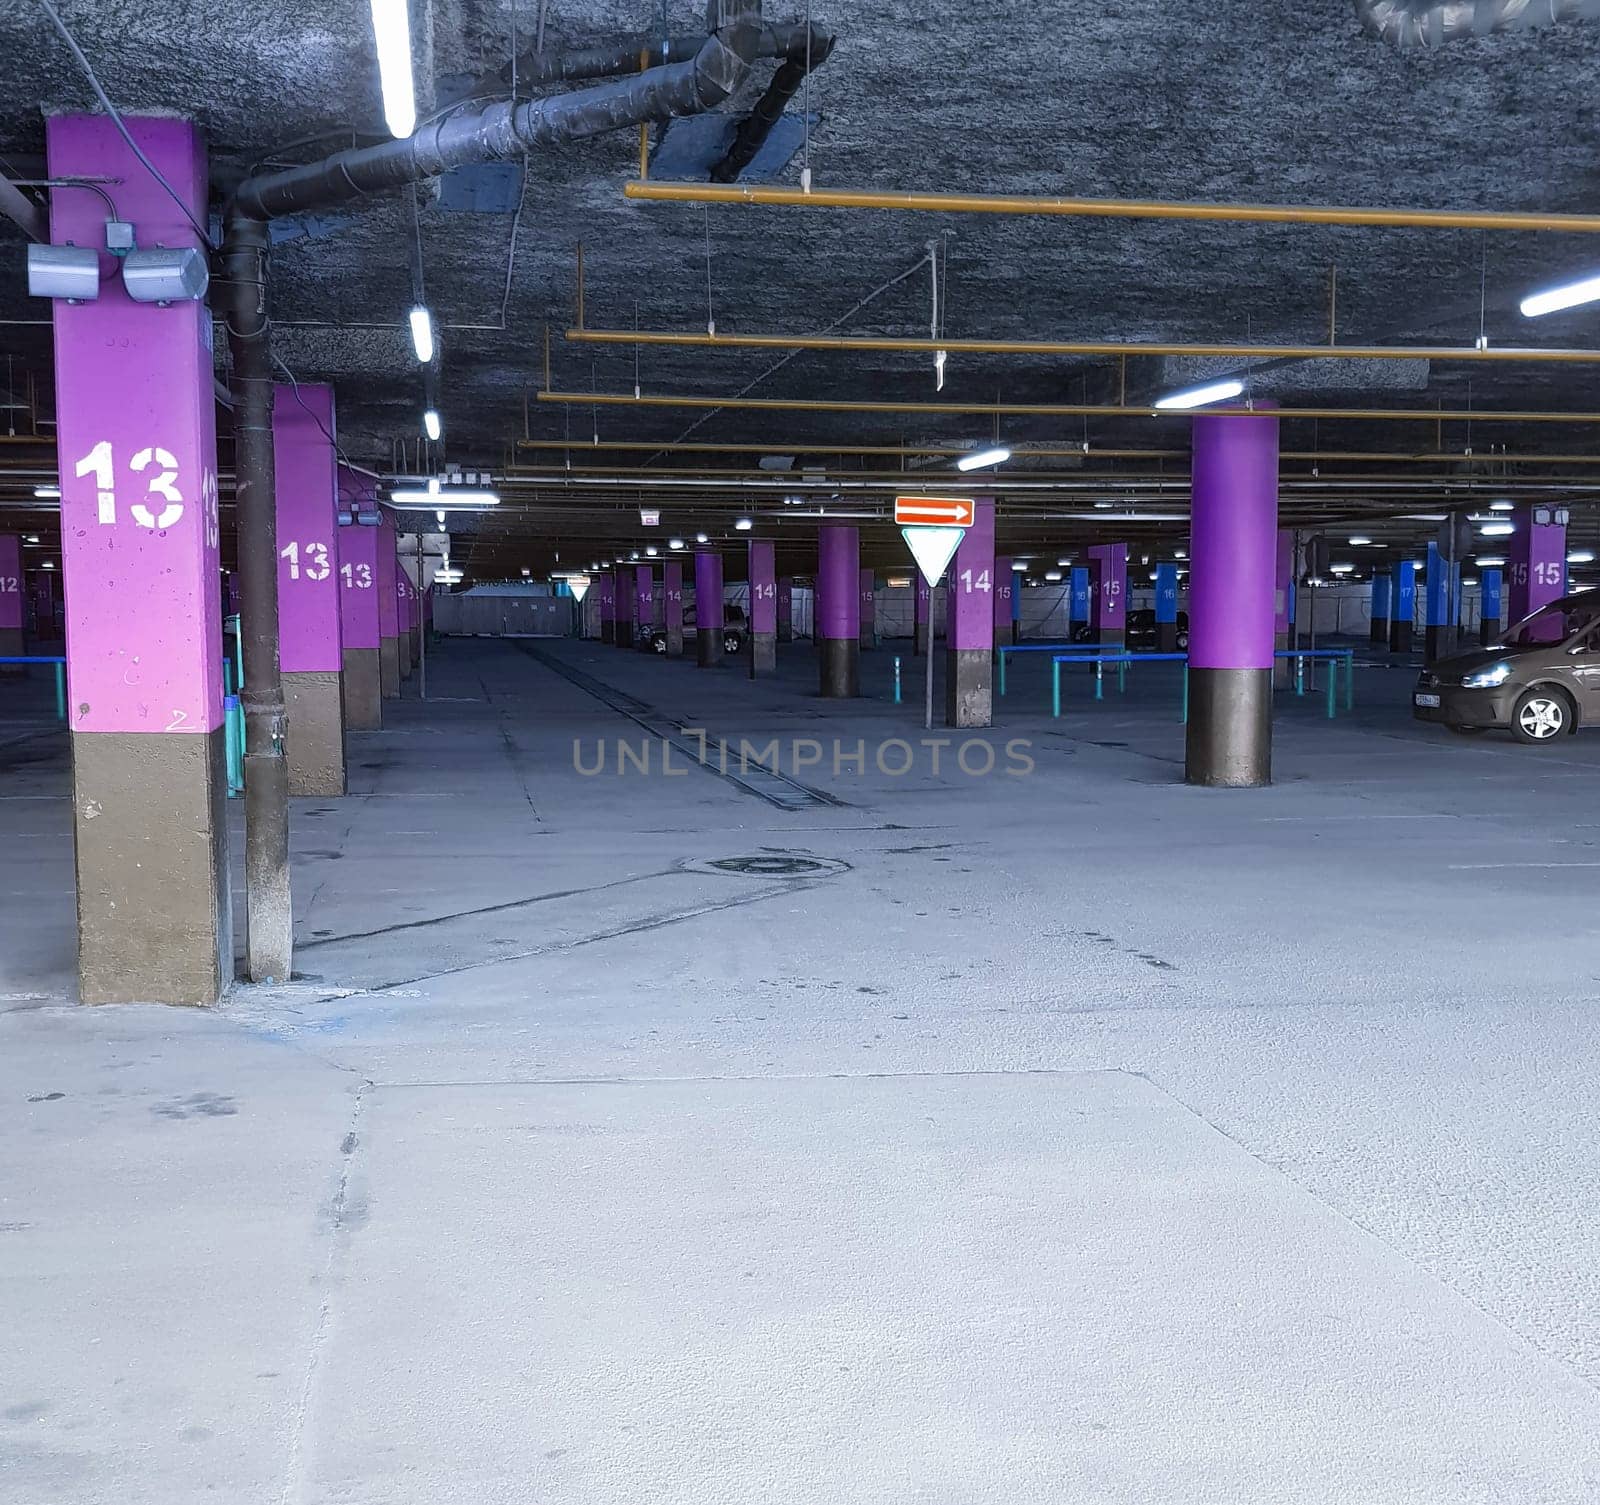 Underground Parking with poles with markings for cars in the shopping center, a place for text at the bottom.